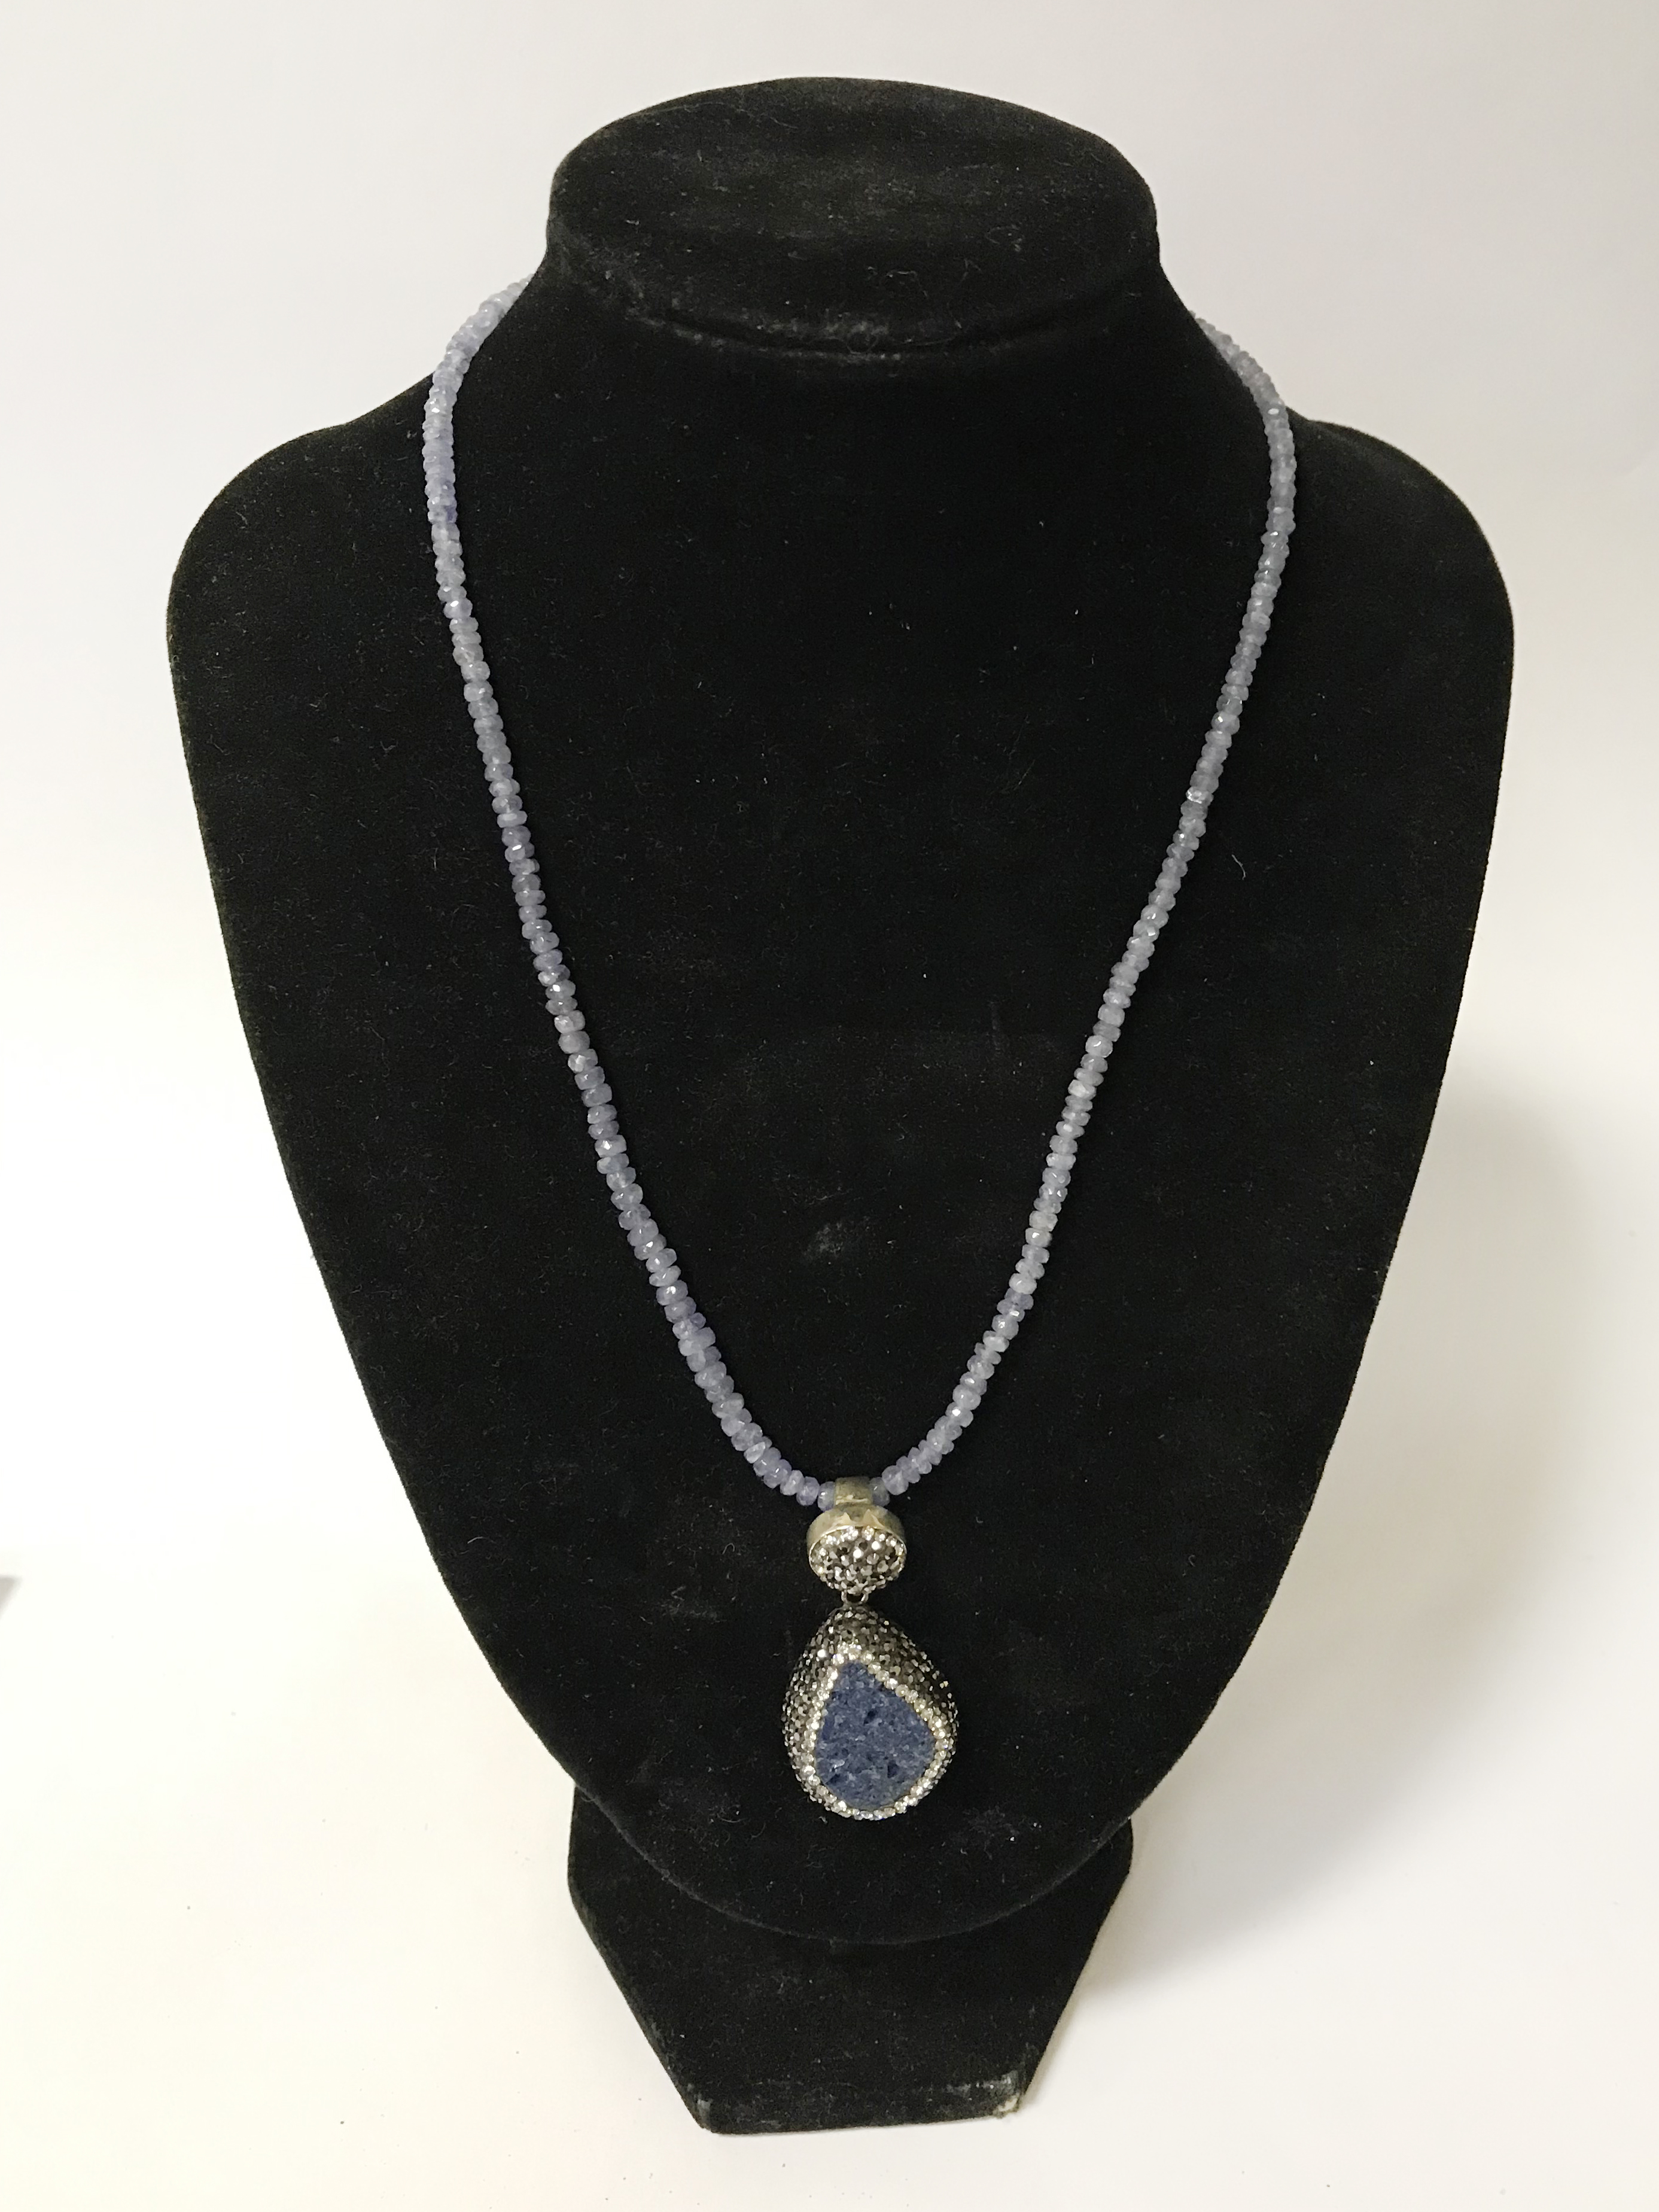 STERLING SILVER TANZANITE NECKLACE WITH MATCHING STUD EARRINGS